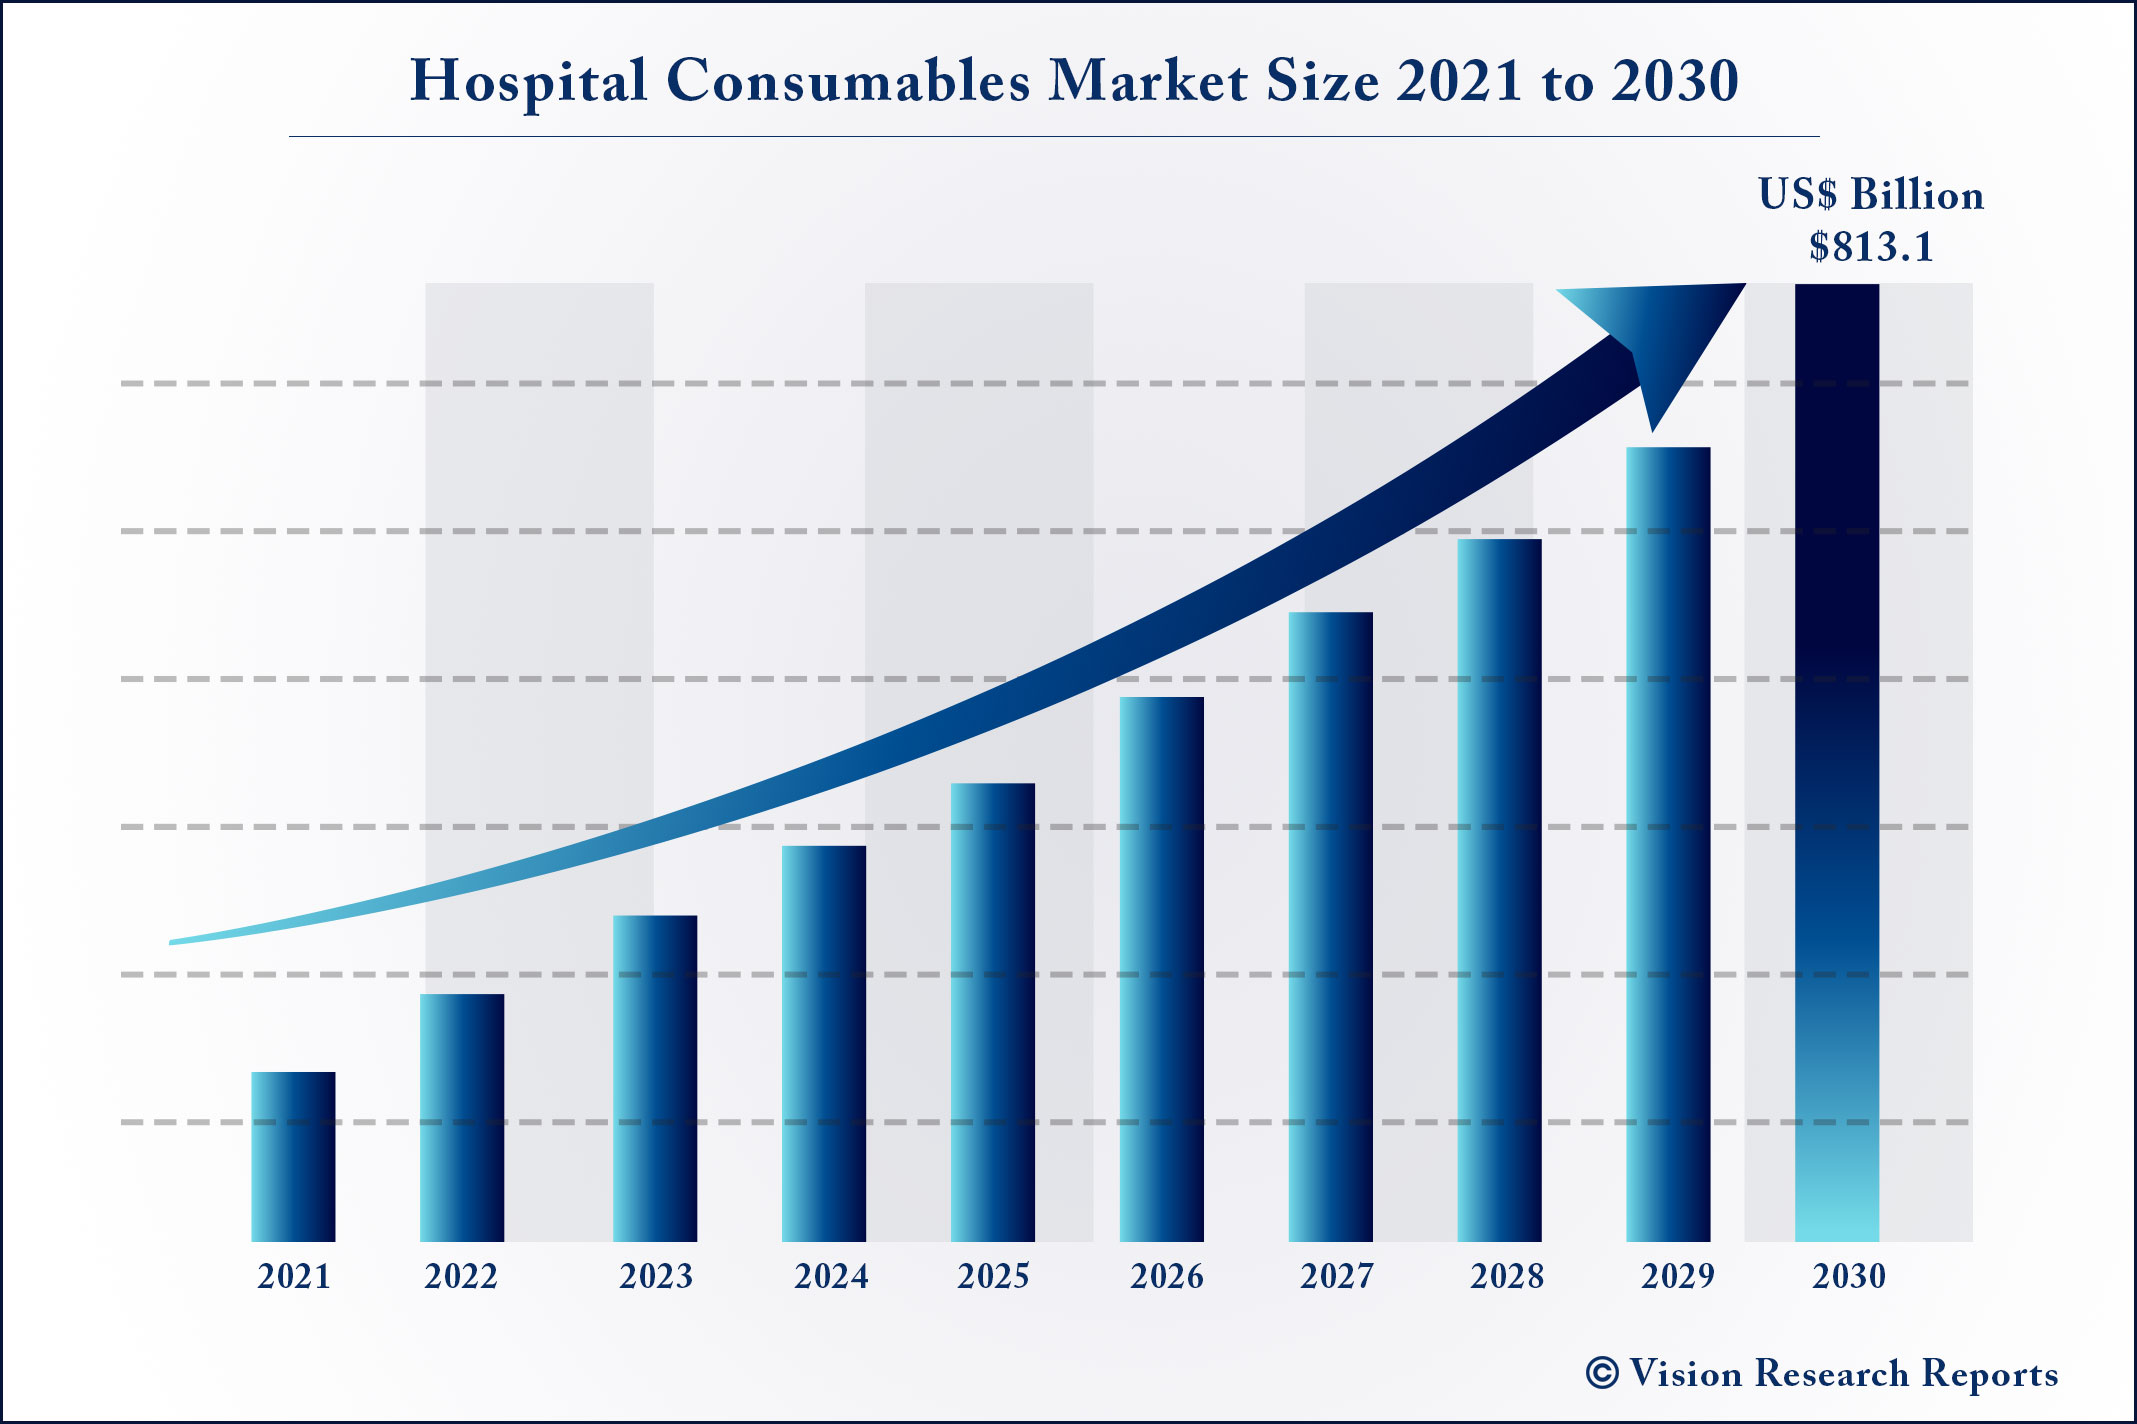 Hospital Consumables Market Size 2021 to 2030